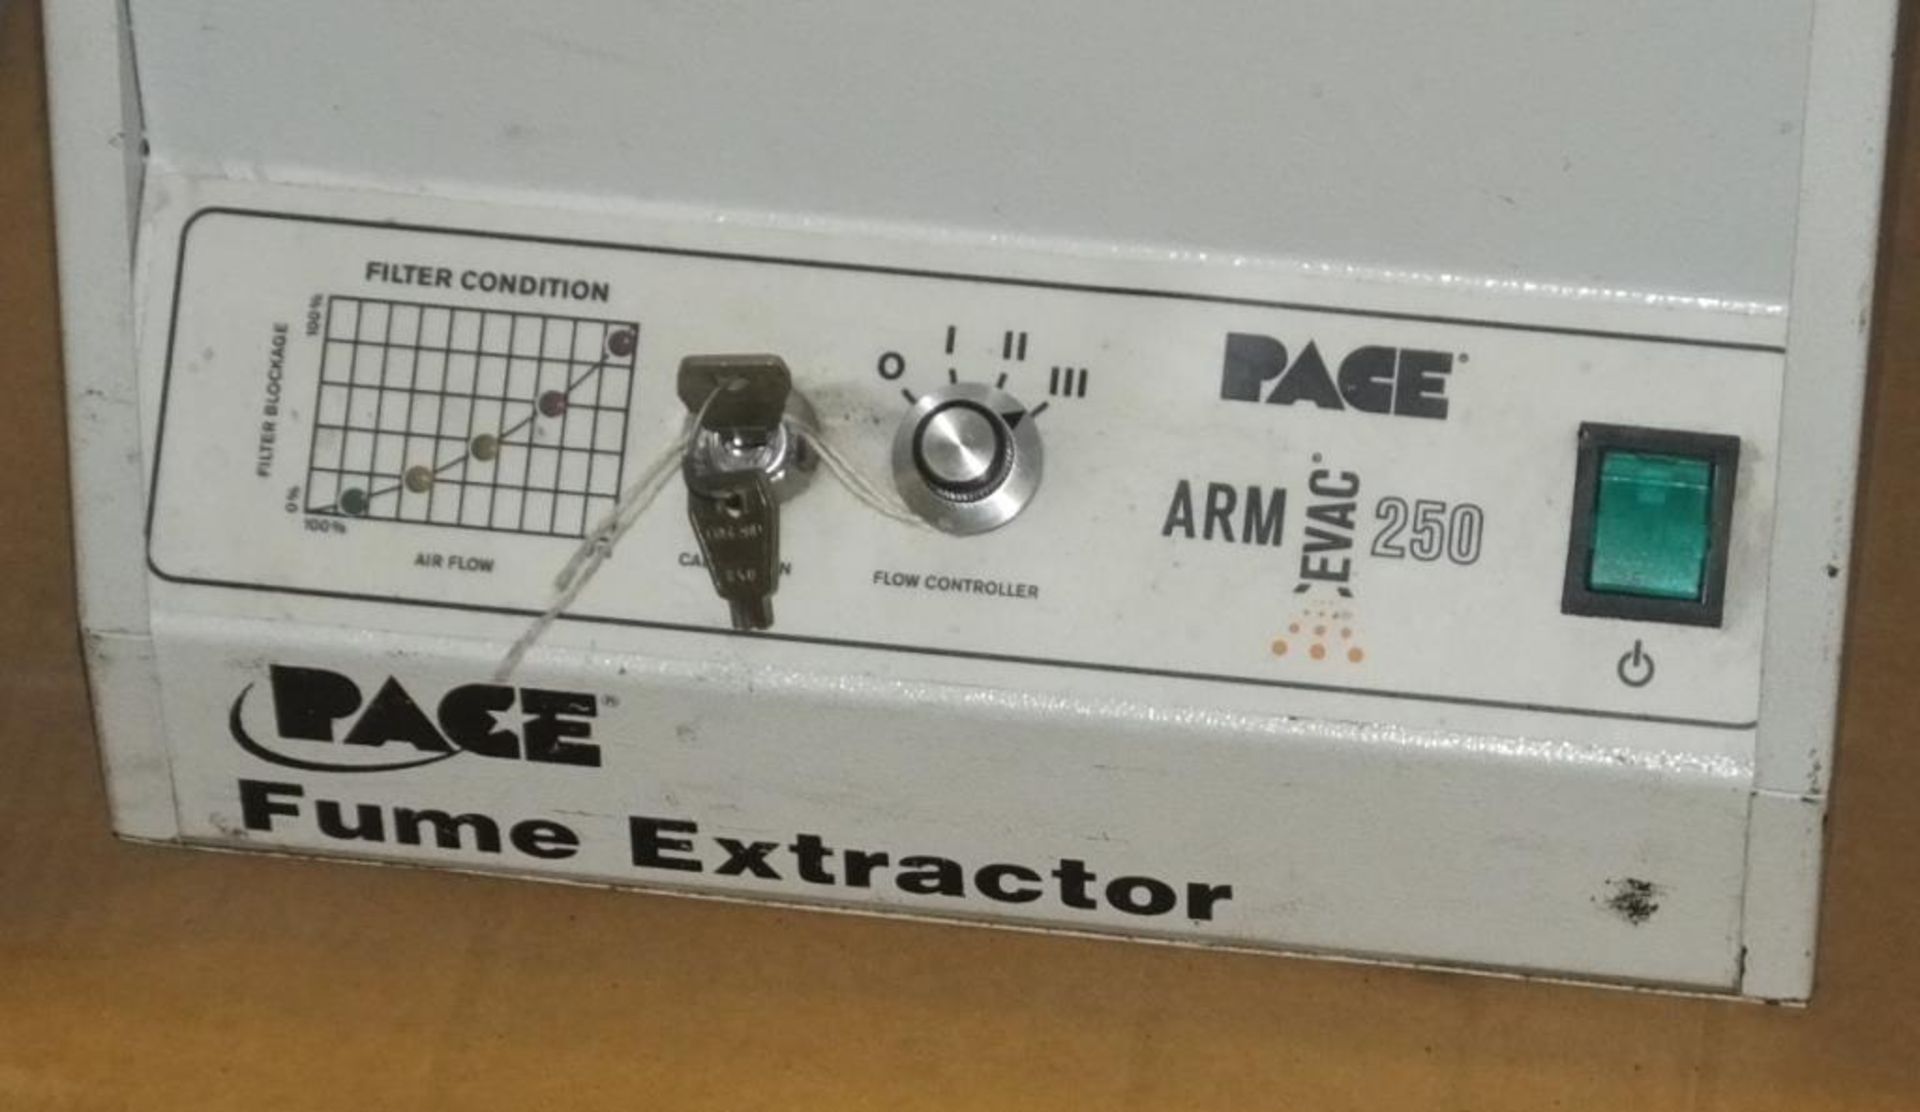 6x Pace Arm-Evac 250 Fume Extractor Units - Image 2 of 2